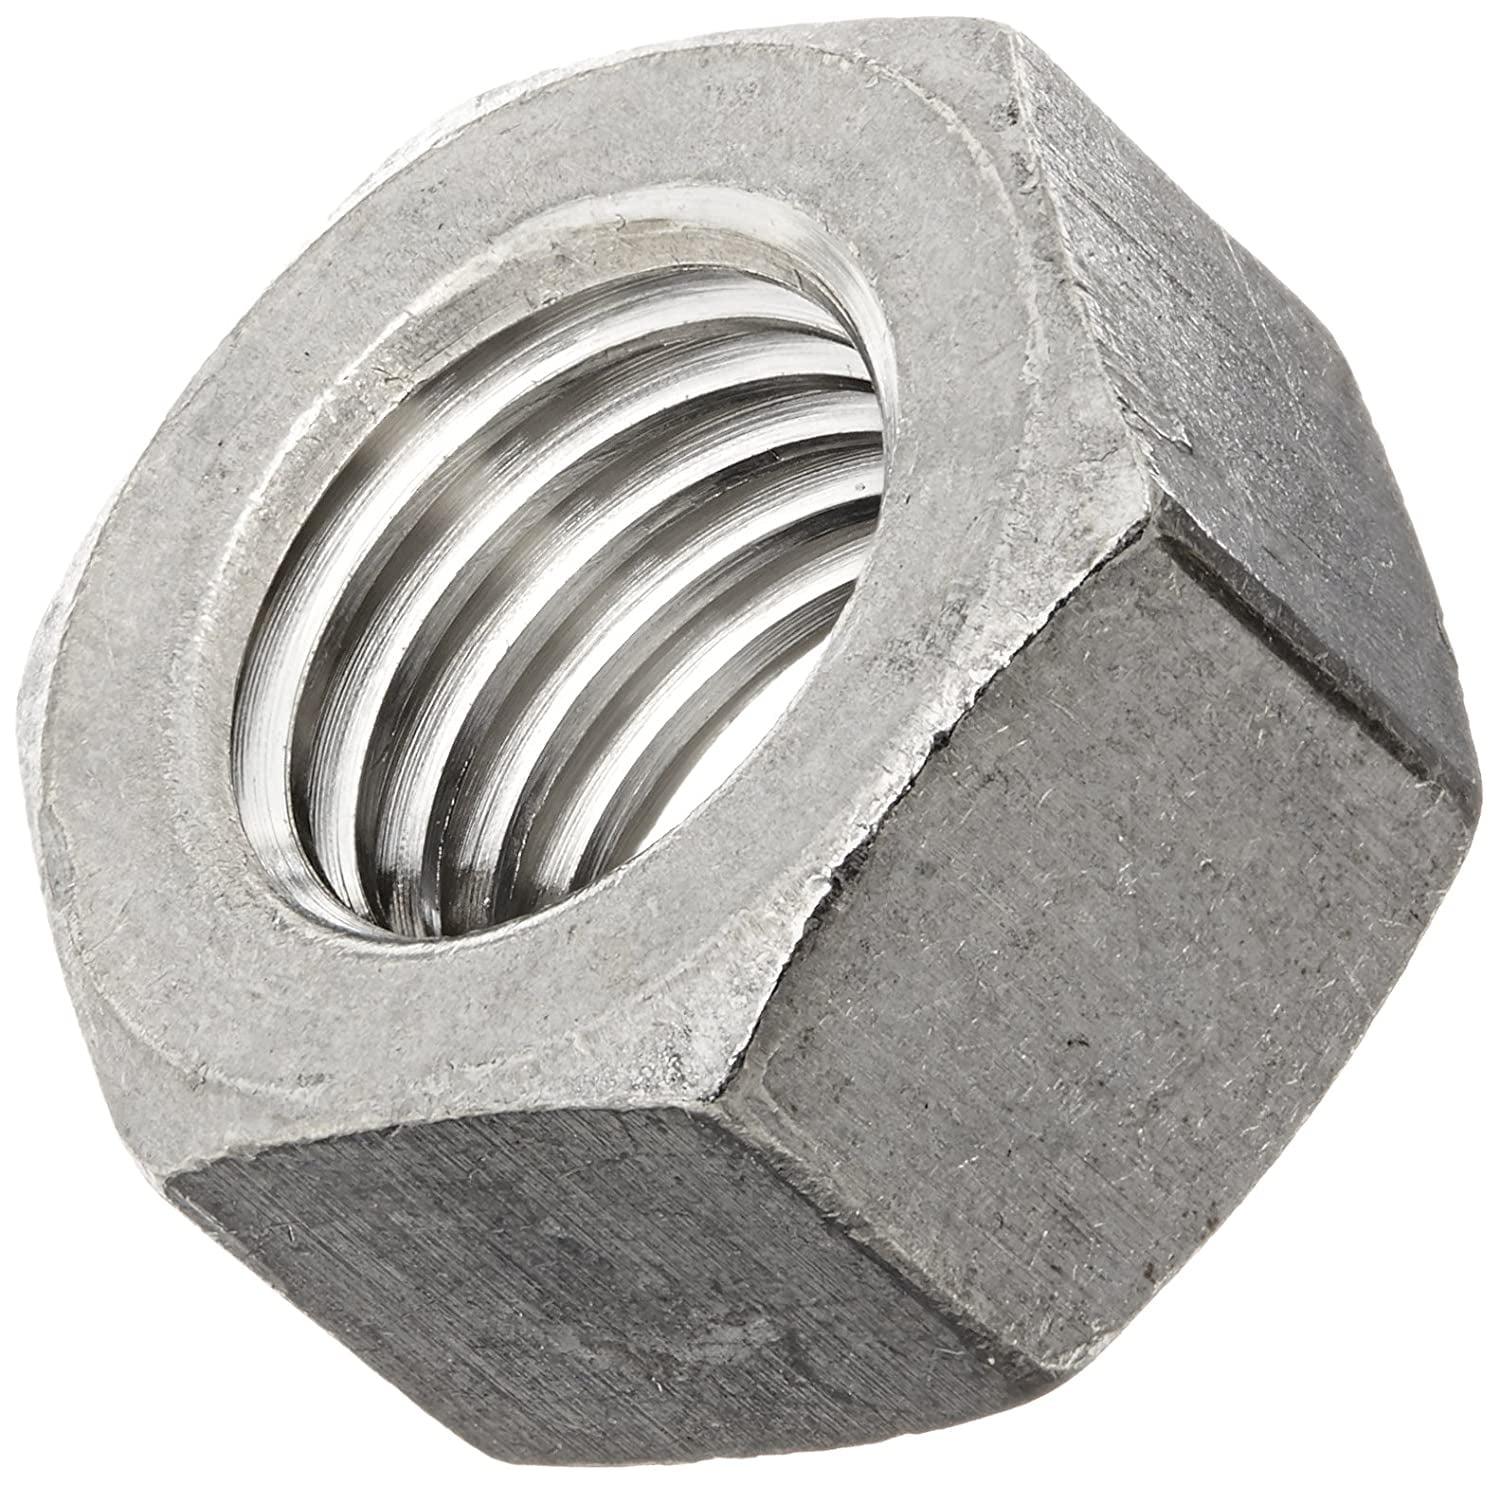 18-8 Stainless Steel Hex Jam Nut 1/2 Width Across Flats Plain Finish ASME B18.2.2 Pack of 100 3/16 Thick 5/16-24 Thread Size 